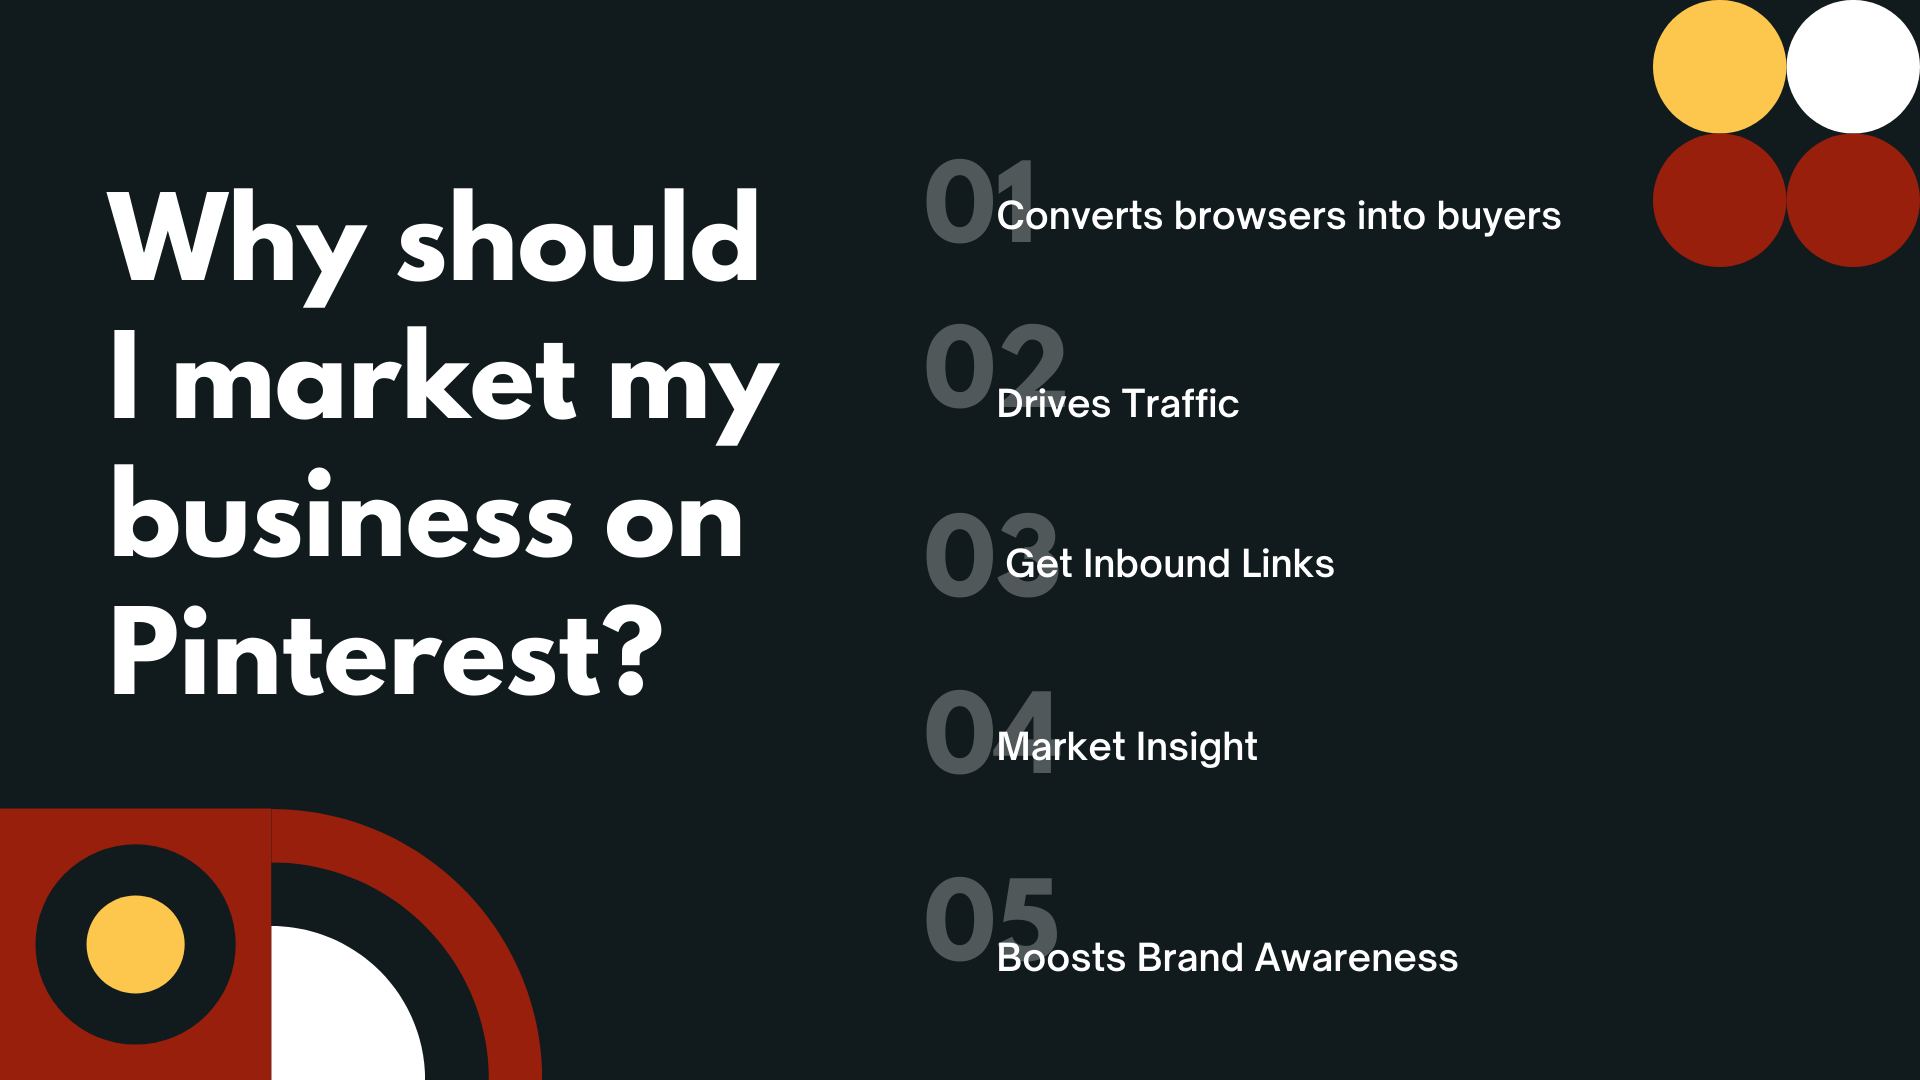 Why should I market my business on Pinterest